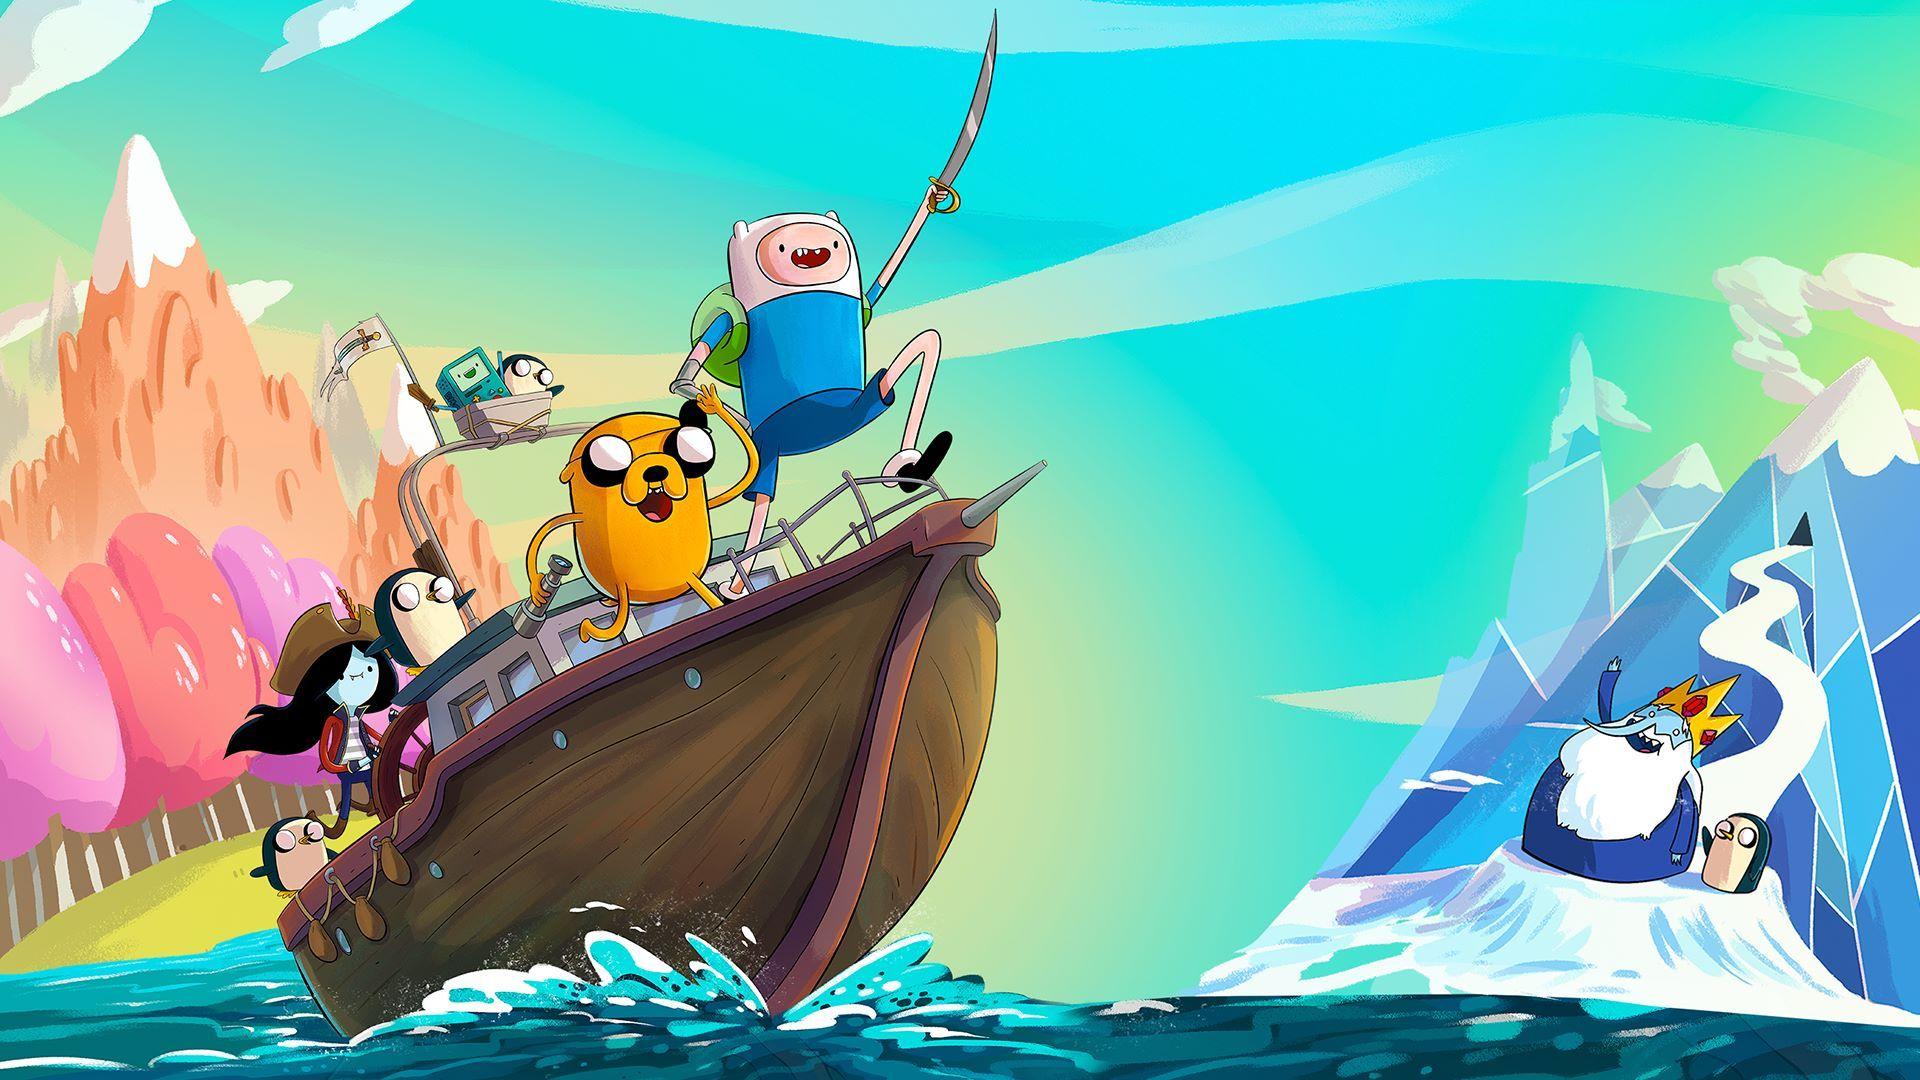 Adventure Time: Pirates of the Enchiridion Achievement List Revealed